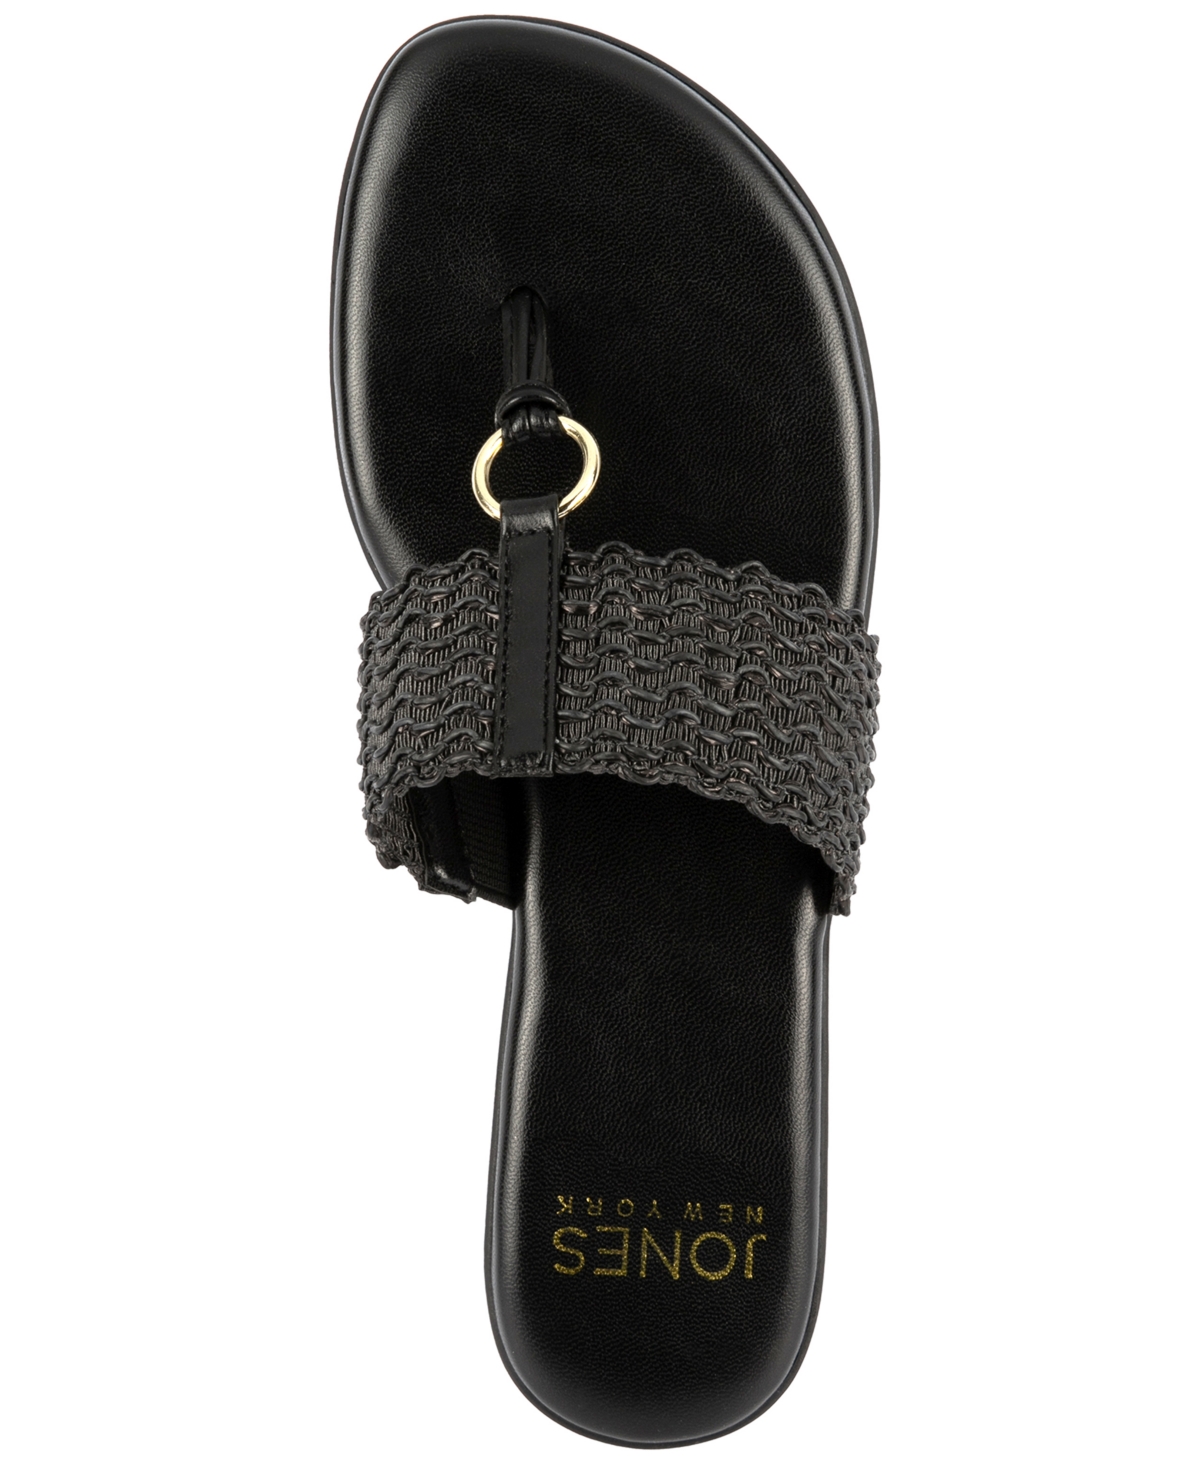 Shop Jones New York Sonal Woven Thong Sandals, Created For Macy's In Natural